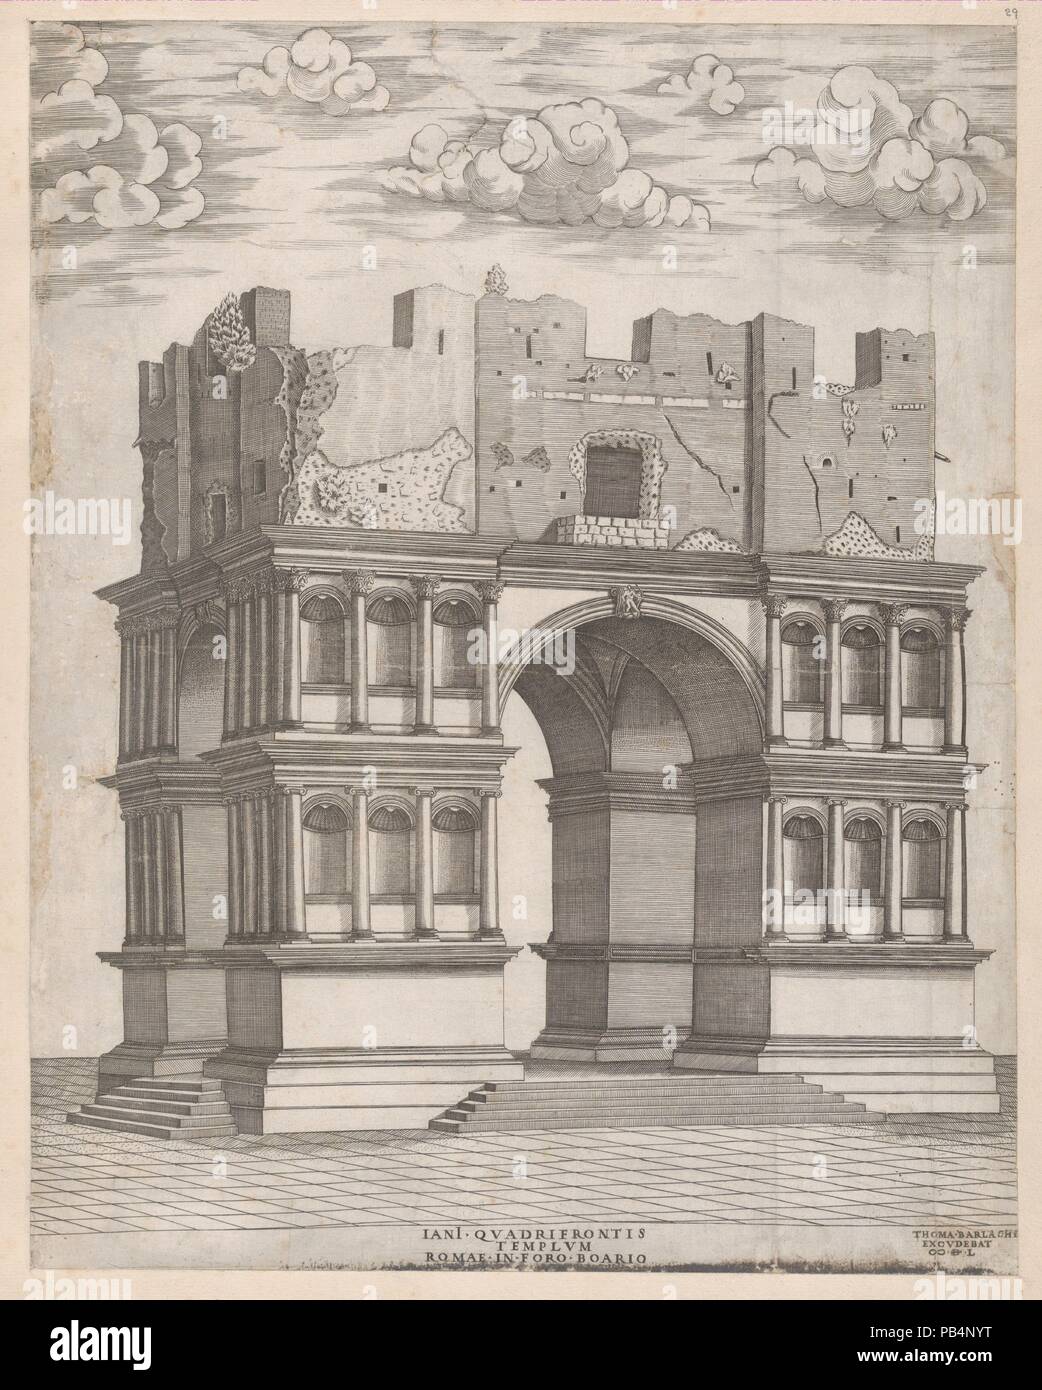 Speculum Romanae Magnificentiae: Temple of Janus. Artist: Anonymous. Dimensions: sheet: 22 1/8 x 16 3/4 in. (56.2 x 42.6 cm)  plate: 17 11/16 x 13 7/8 in. (45 x 35.2 cm). Publisher: Tommaso Barlacchi (active Rome, 1541-50). Series/Portfolio: Speculum Romanae Magnificentiae. Date: 1550.  This print comes from the museum's copy of the Speculum Romanae Magnificentiae (The Mirror of Roman Magnificence) The Speculum found its origin in the publishing endeavors of Antonio Salamanca and Antonio Lafreri. During their Roman publishing careers, the two foreign publishers - who worked together between 15 Stock Photo